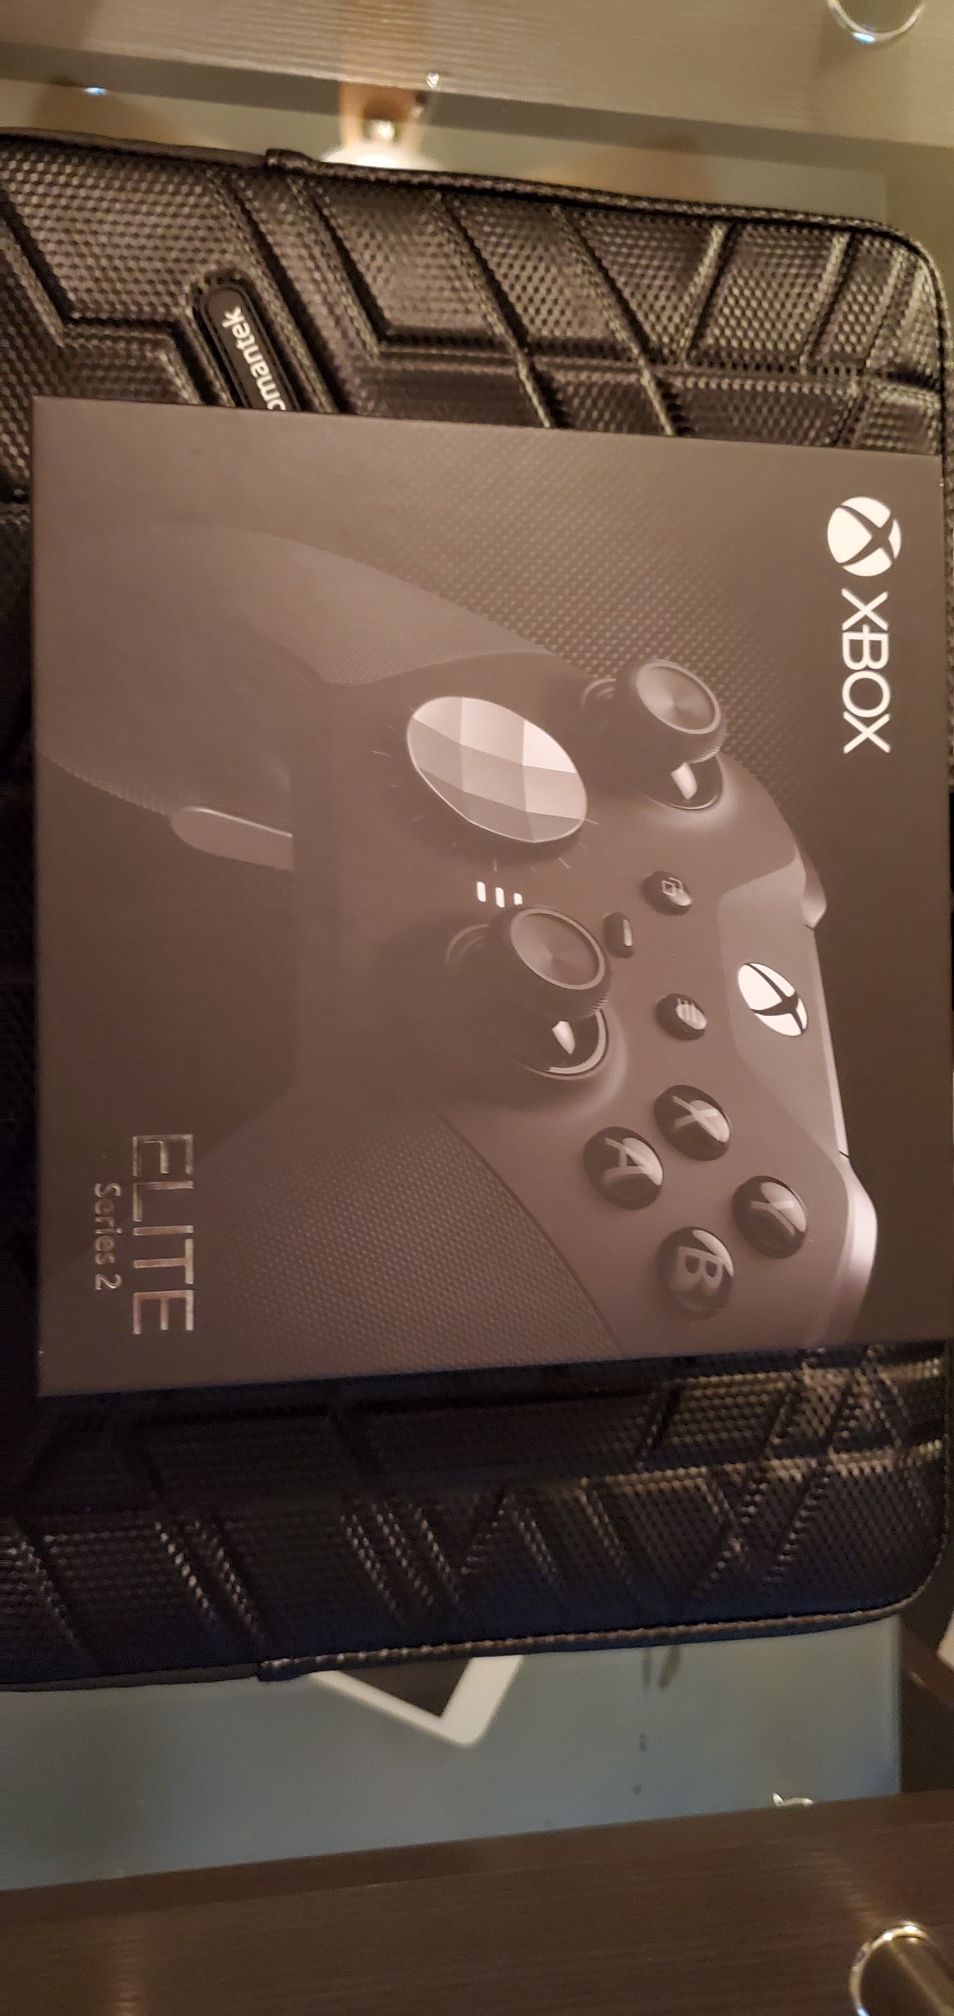 Xbox one elite controller series 2.. Released on NOV THIS YEAR .. Sealed brand new